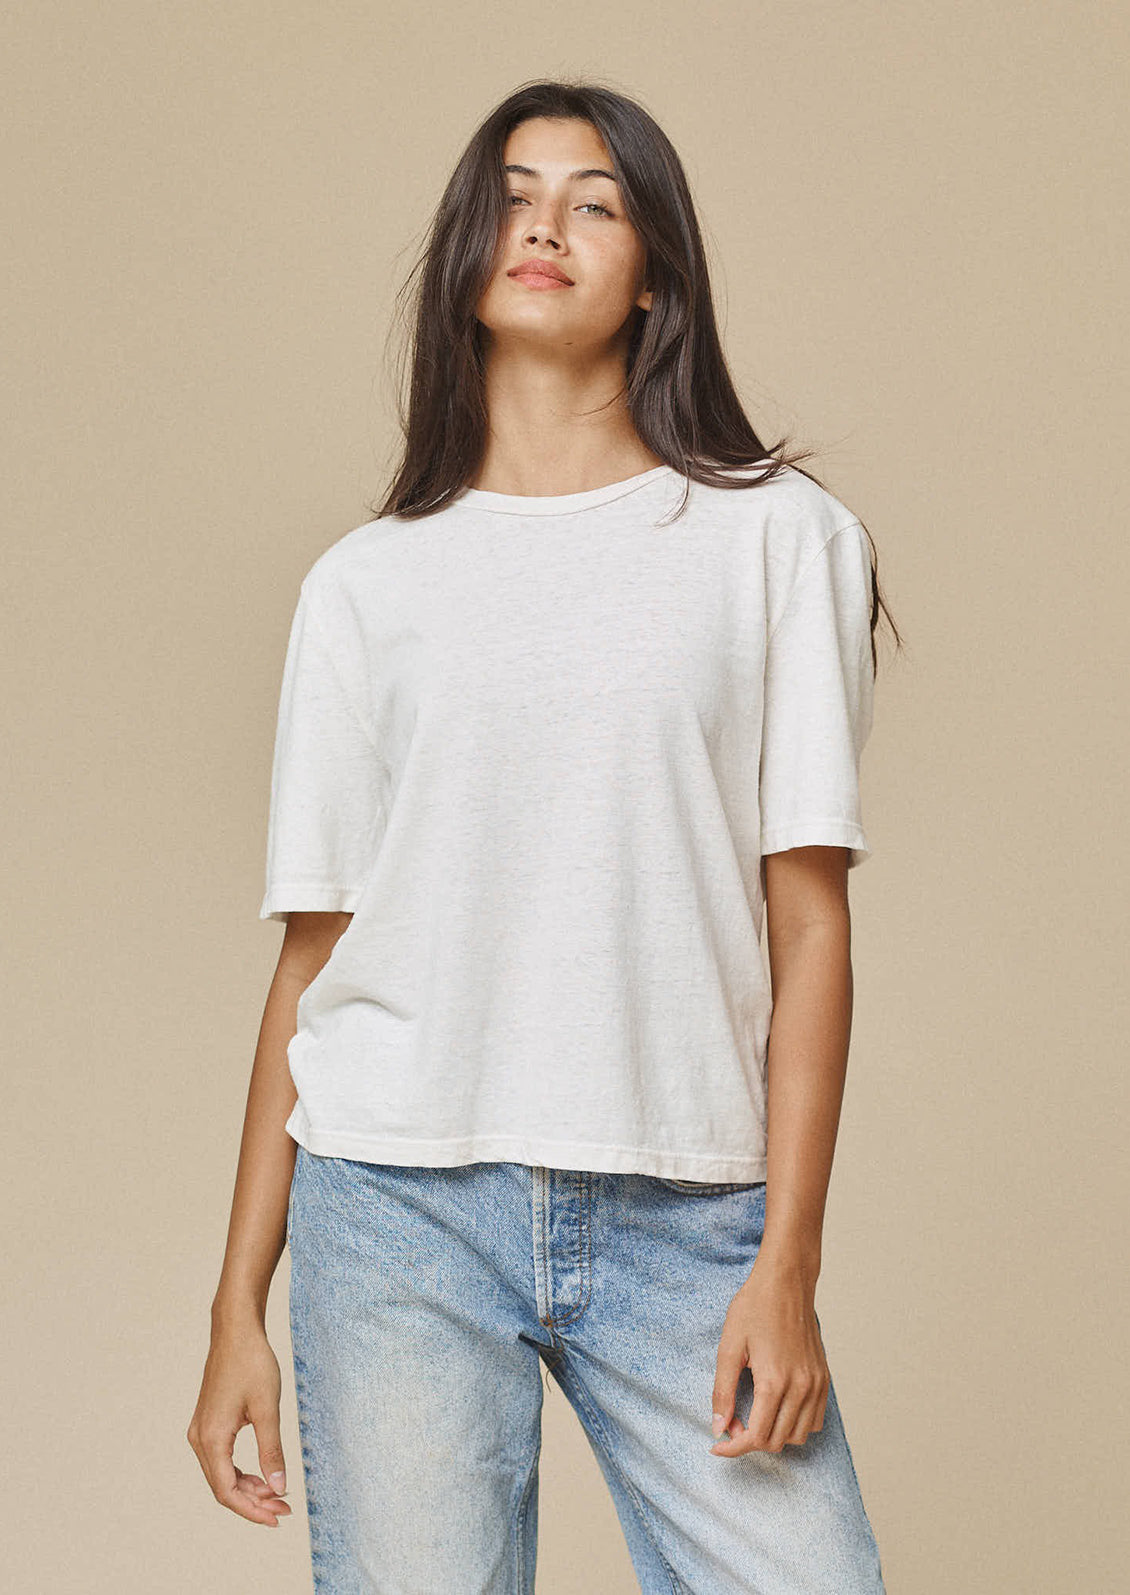 A woman wearing a relaxed hemp-cotton tshirt in white.